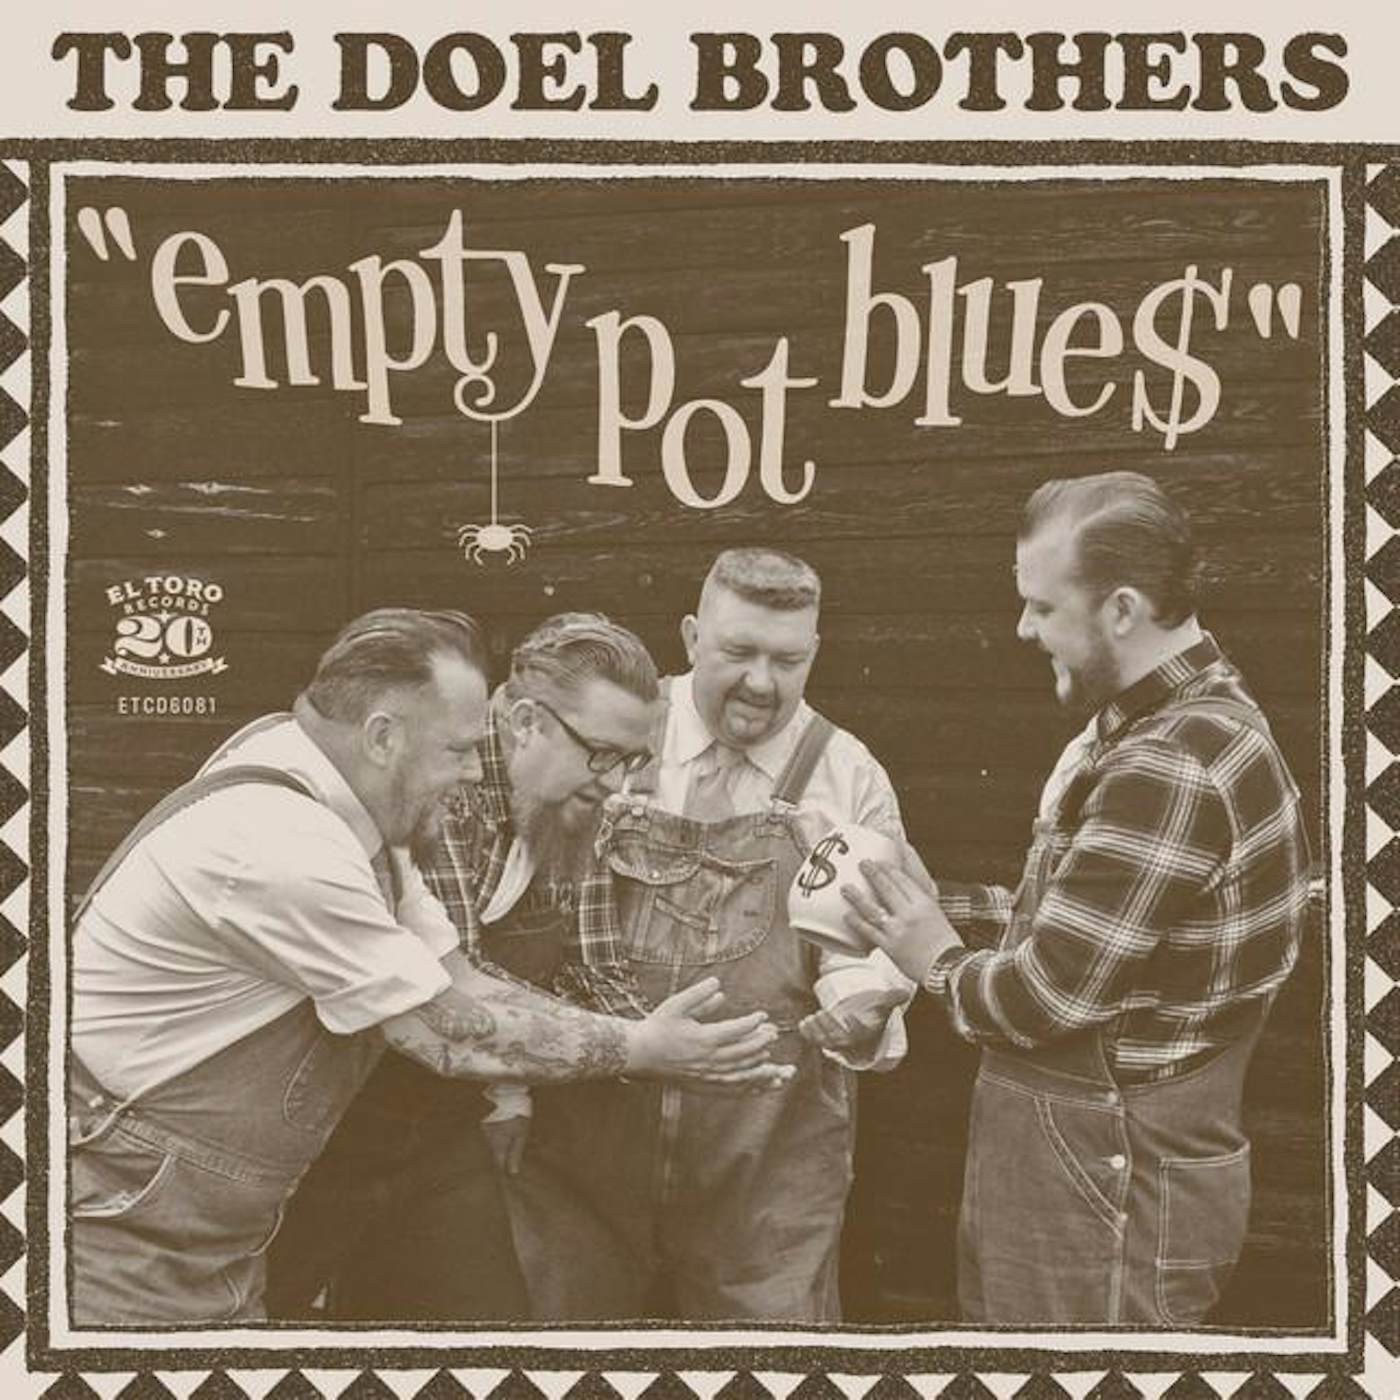 The Doel Brothers